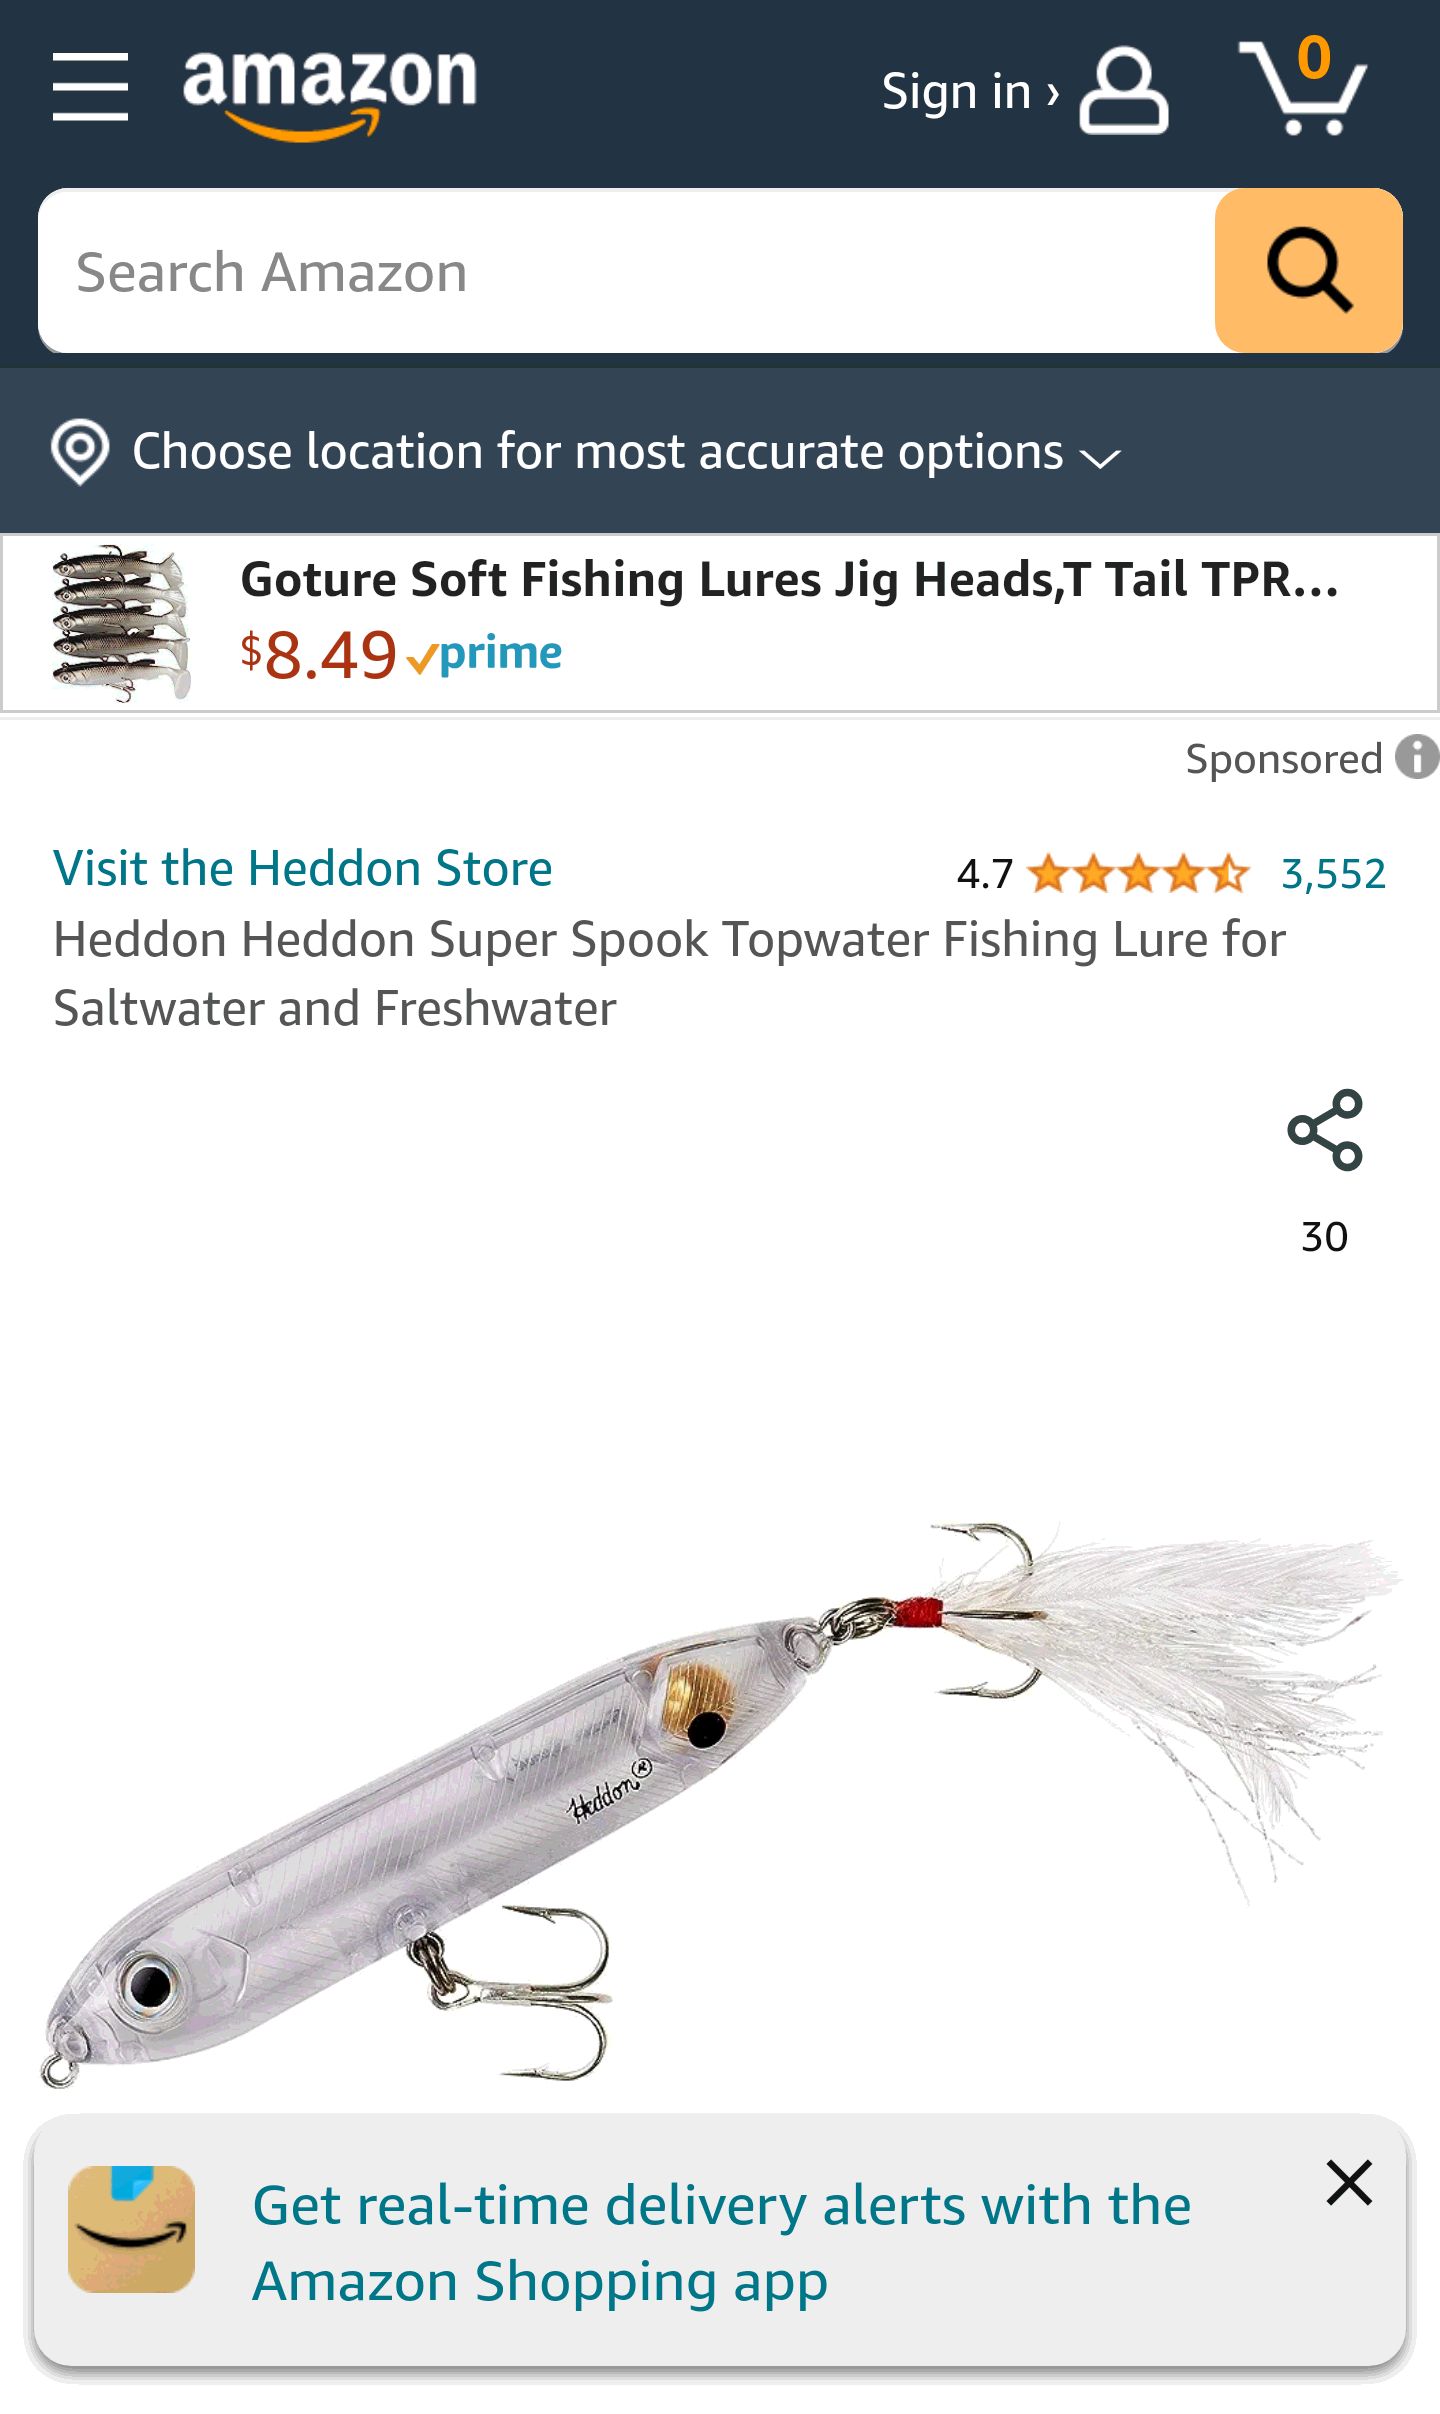 Amazon.com : Heddon Super Spook Topwater Fishing Lure for Saltwater and Freshwater, Clear - Feather Dressed, Feather Super Spook Jr (1/2 oz) : Sports & Outdoors